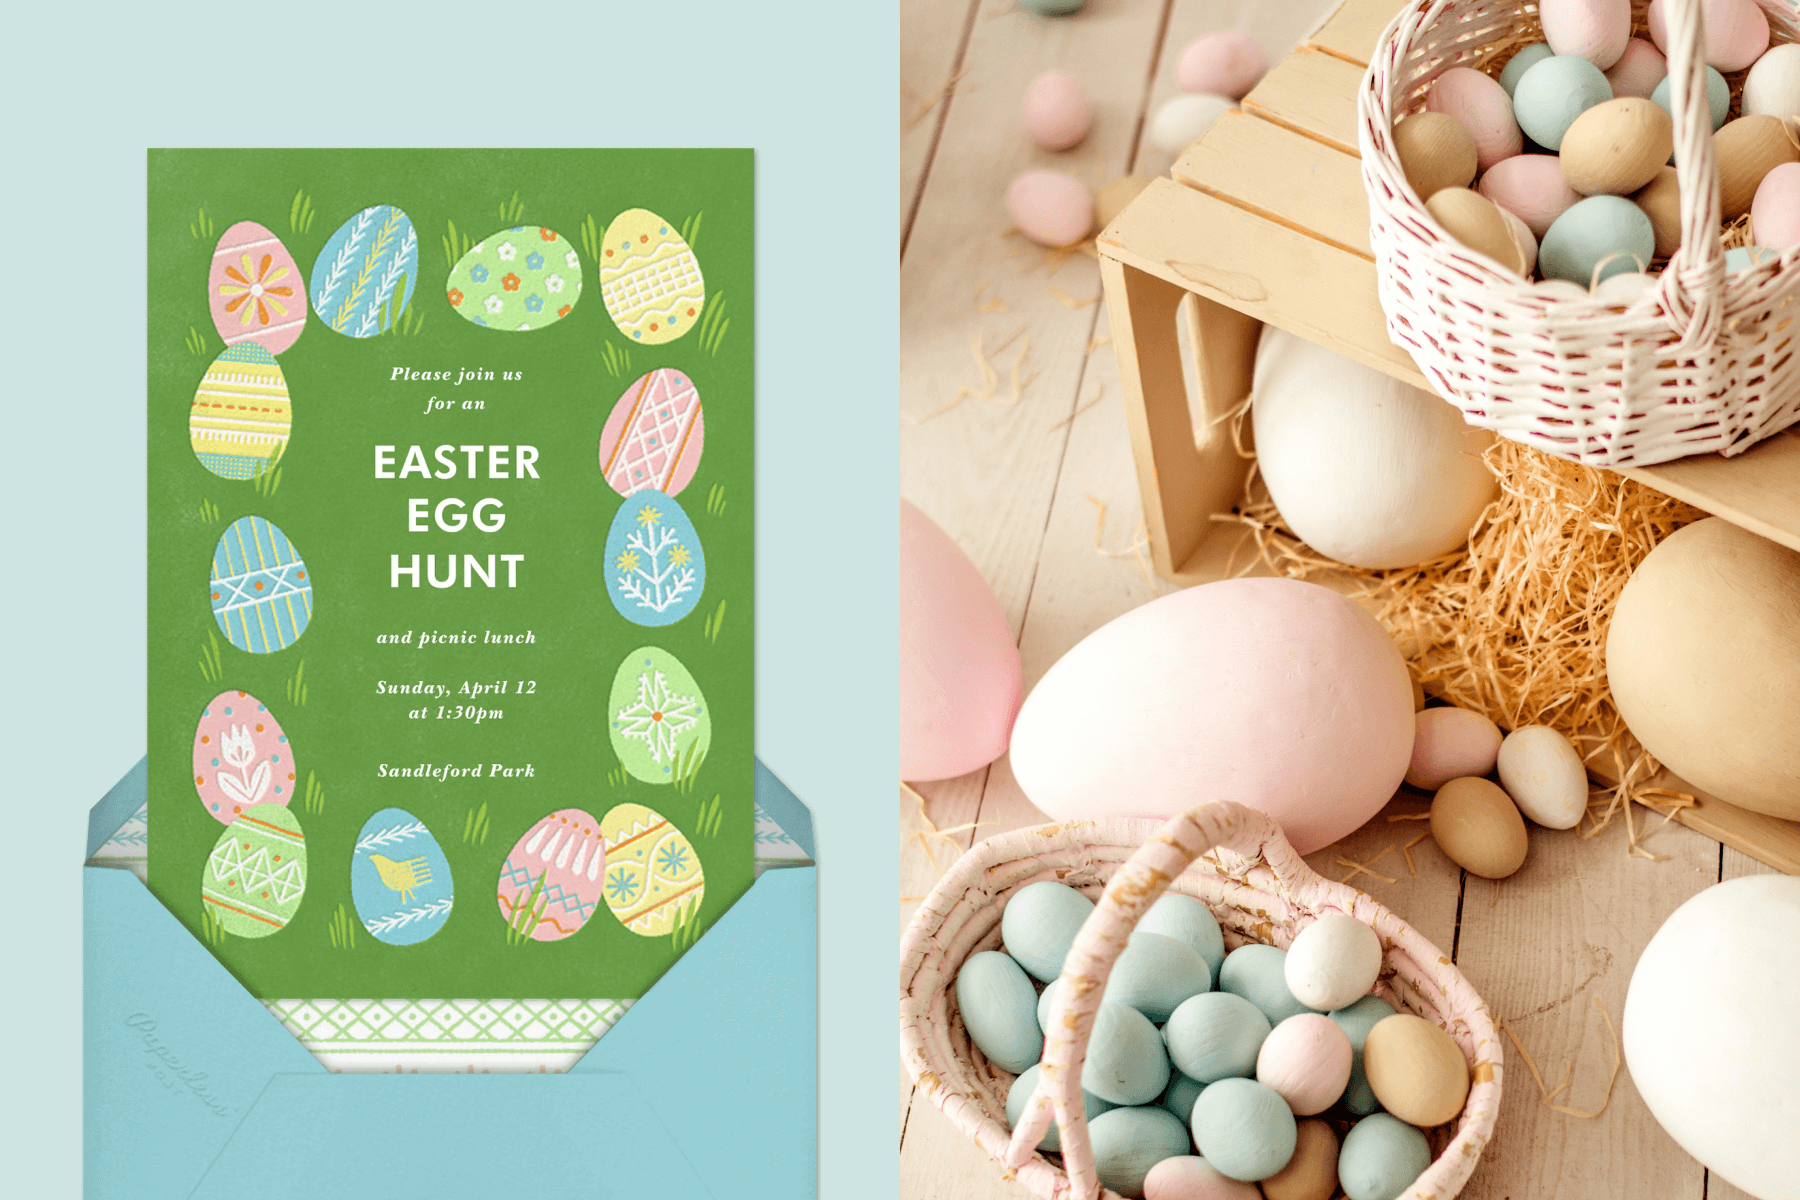 Left: A green Easter invitation with an illustrated border of painted eggs. Right: Pastel colored Easter eggs in baskets alongside large prop eggs.